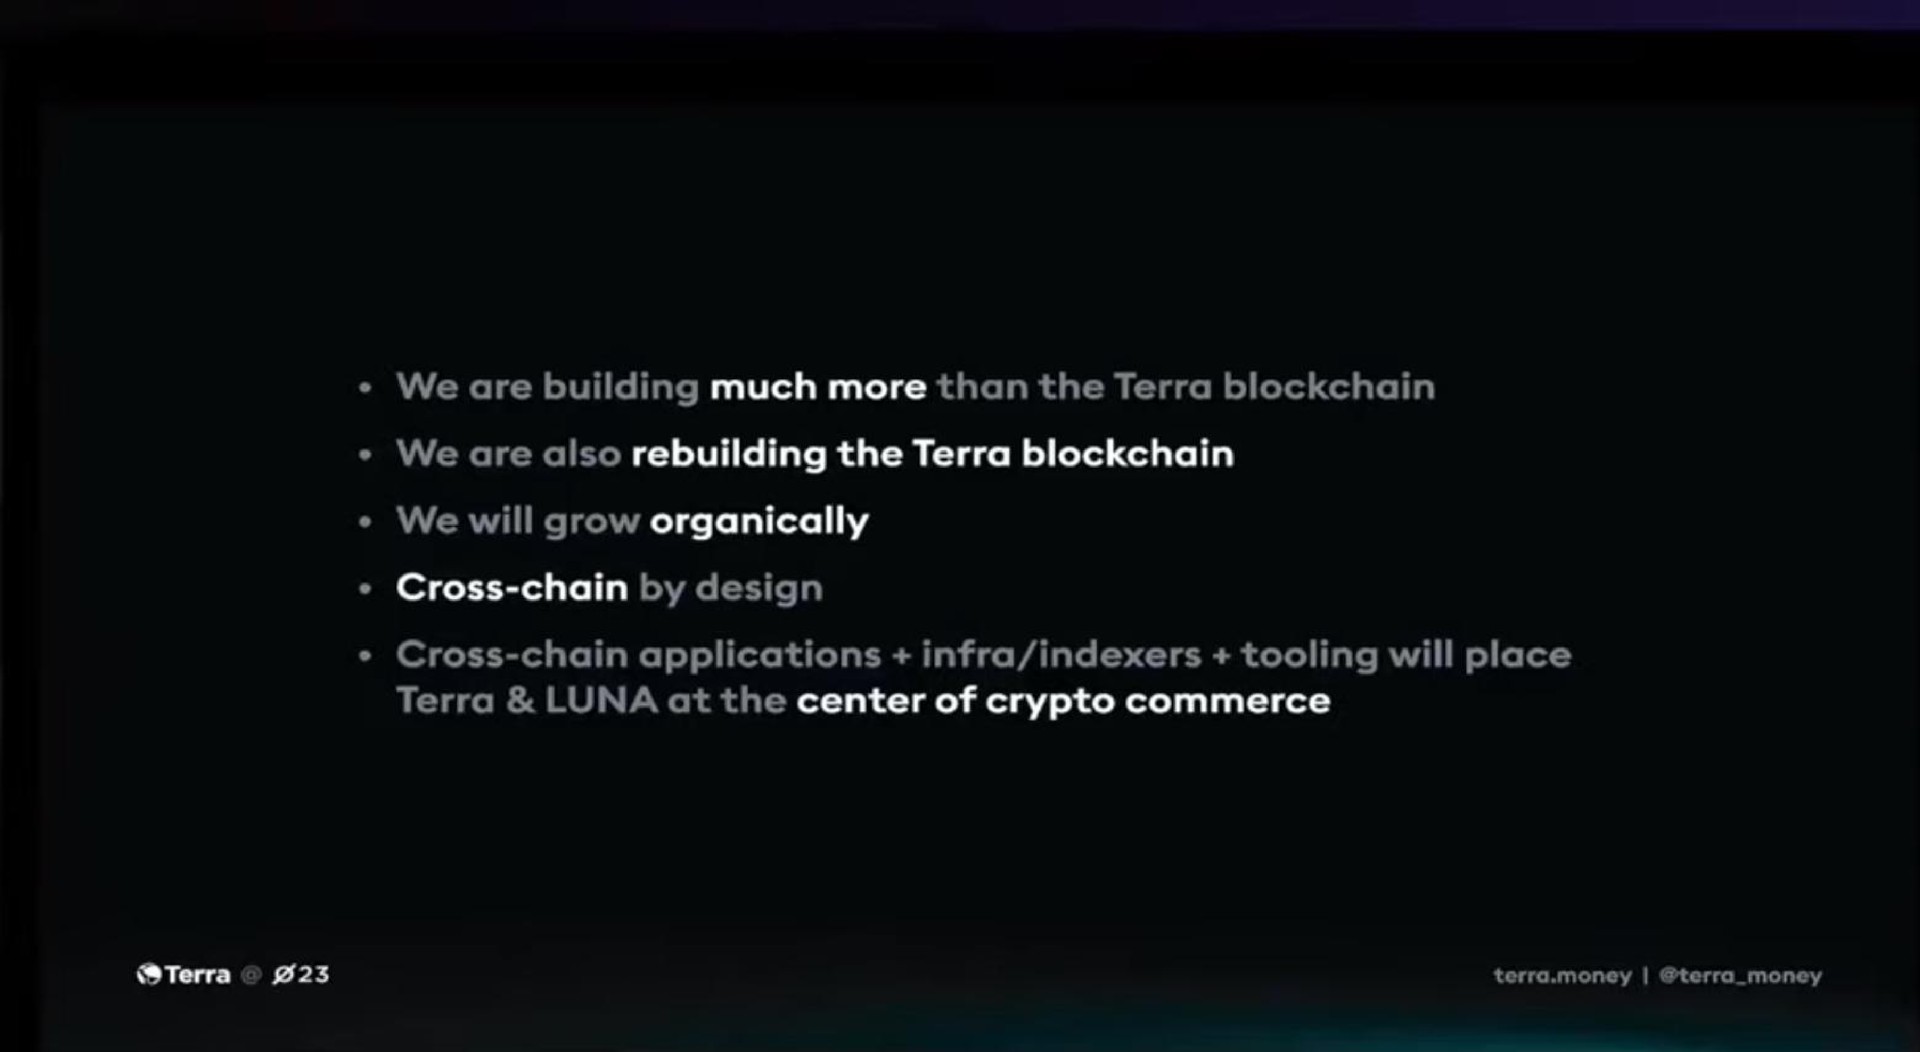 building much more than the also rebuilding the we will grow organically cross chain by design cross chain applications infra indexers tooling will place luna at the center of commerce money money | Terraform Labs